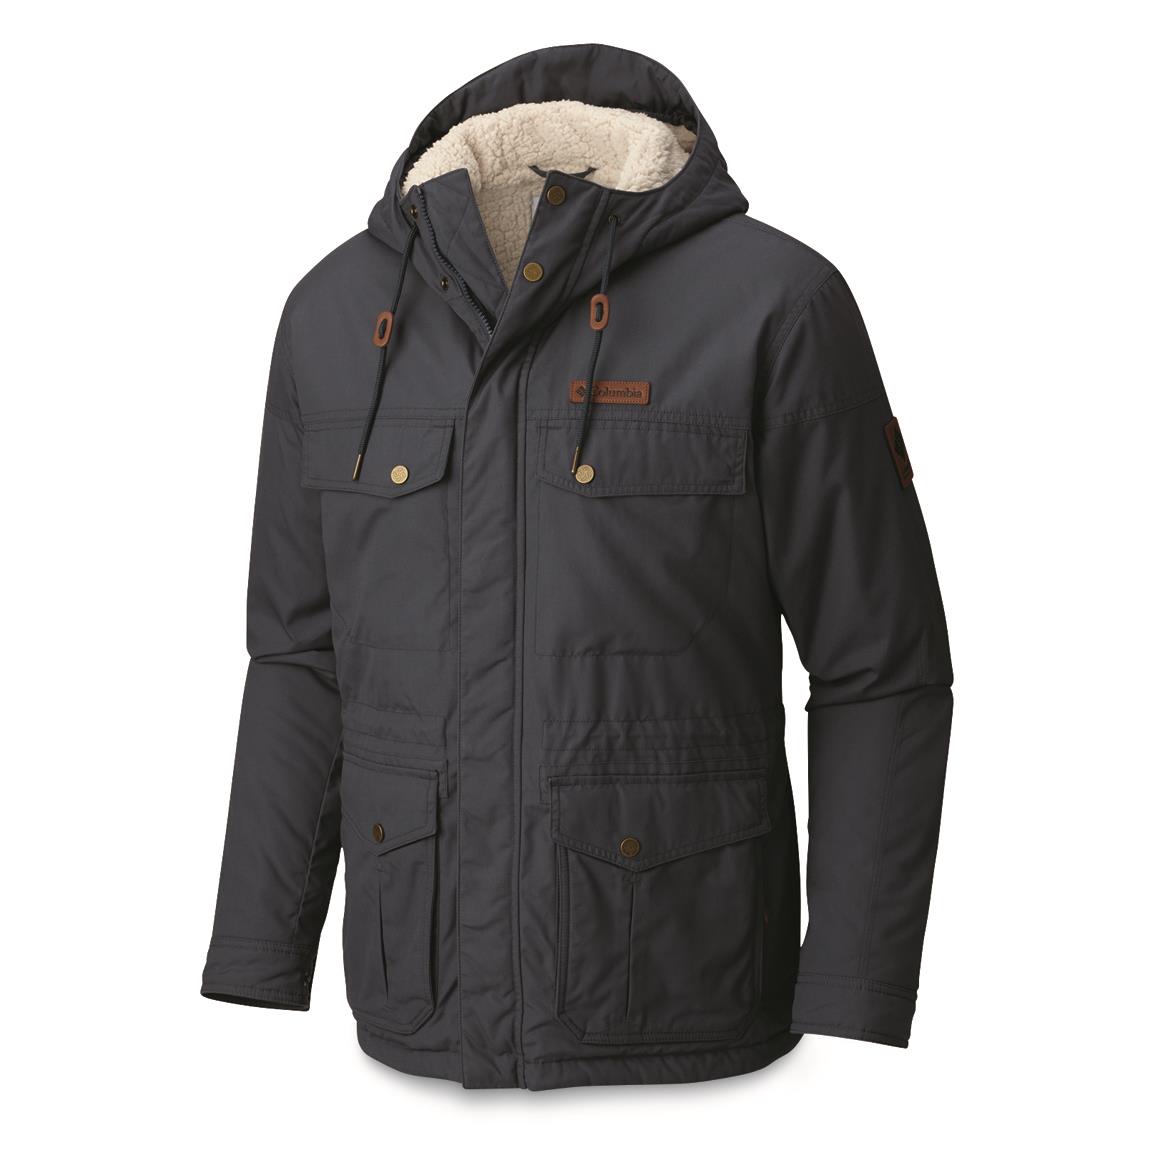 maguire place ii jacket